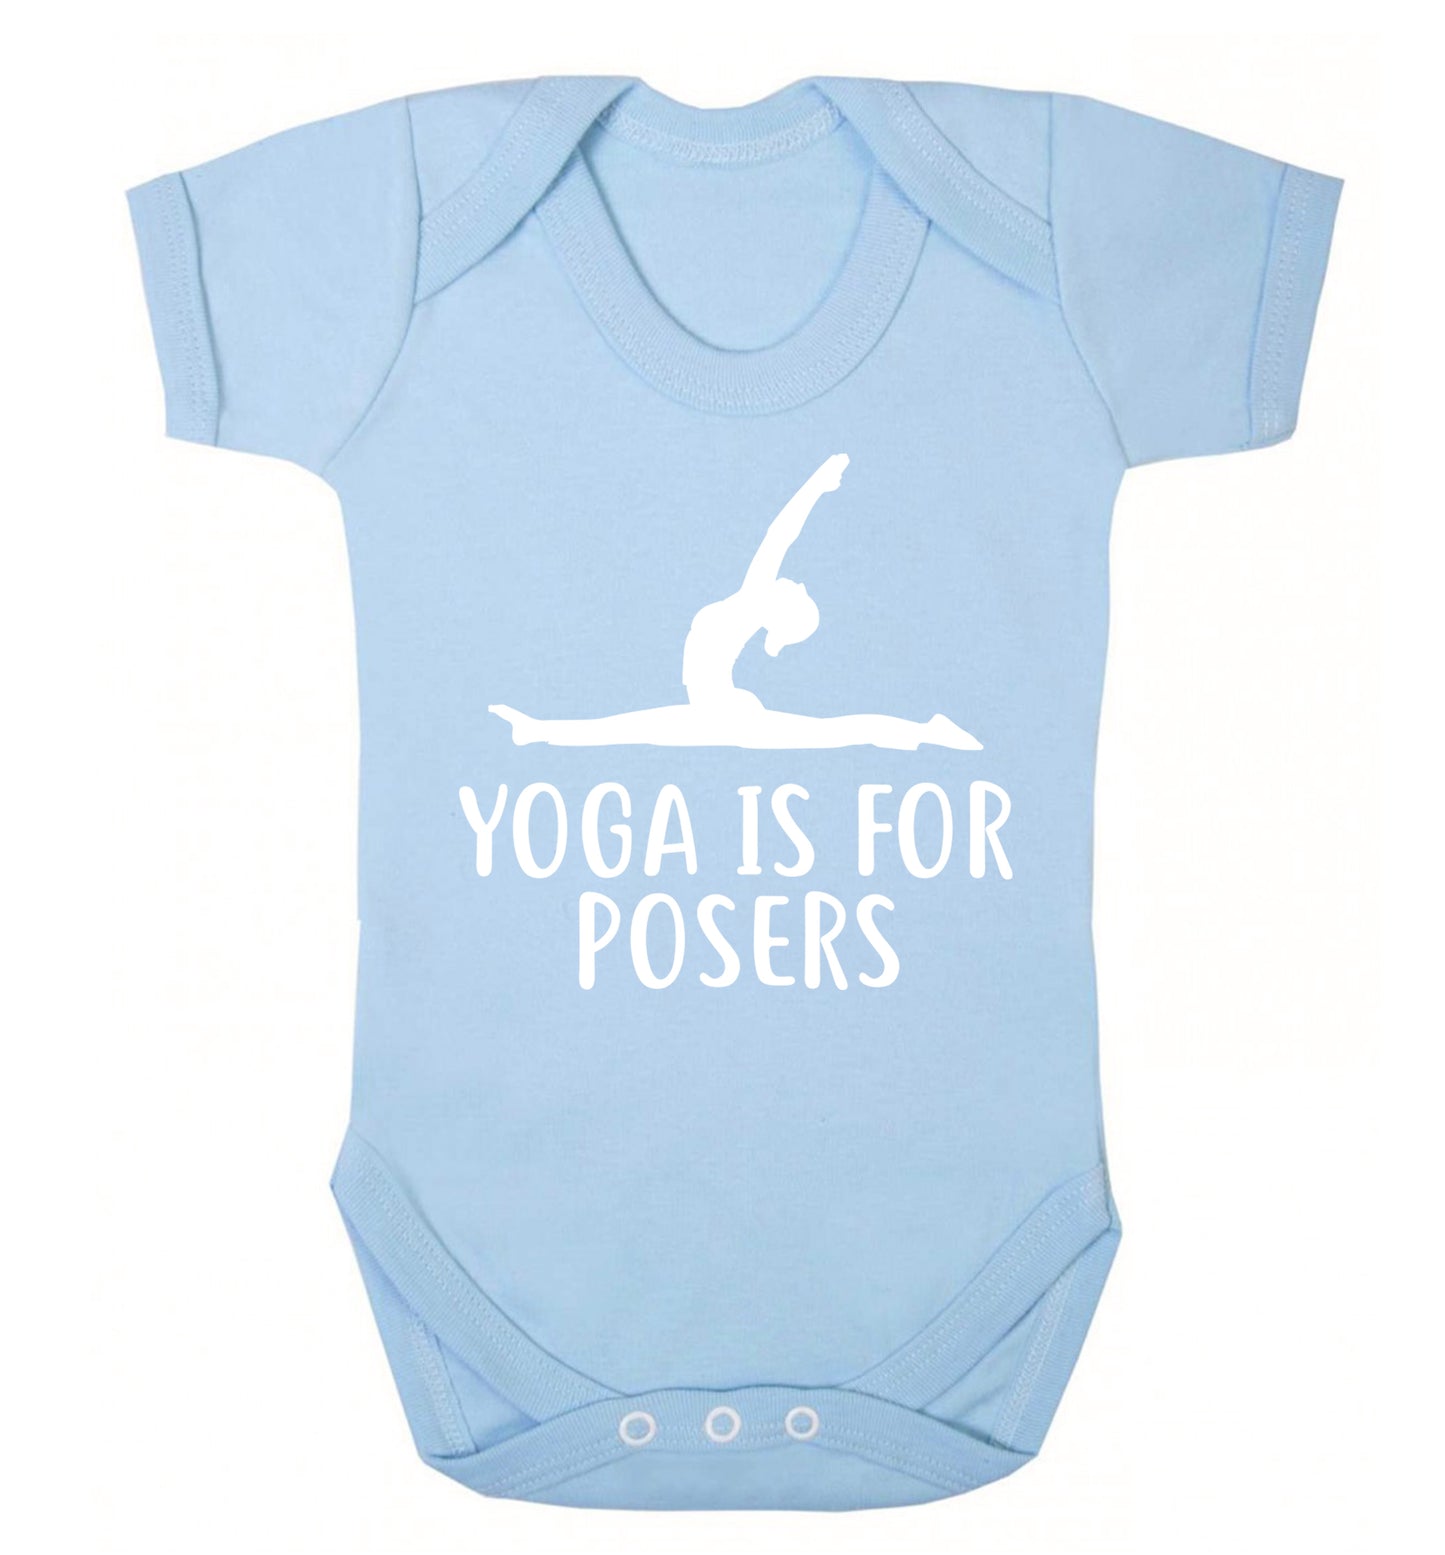 Yoga is for posers Baby Vest pale blue 18-24 months